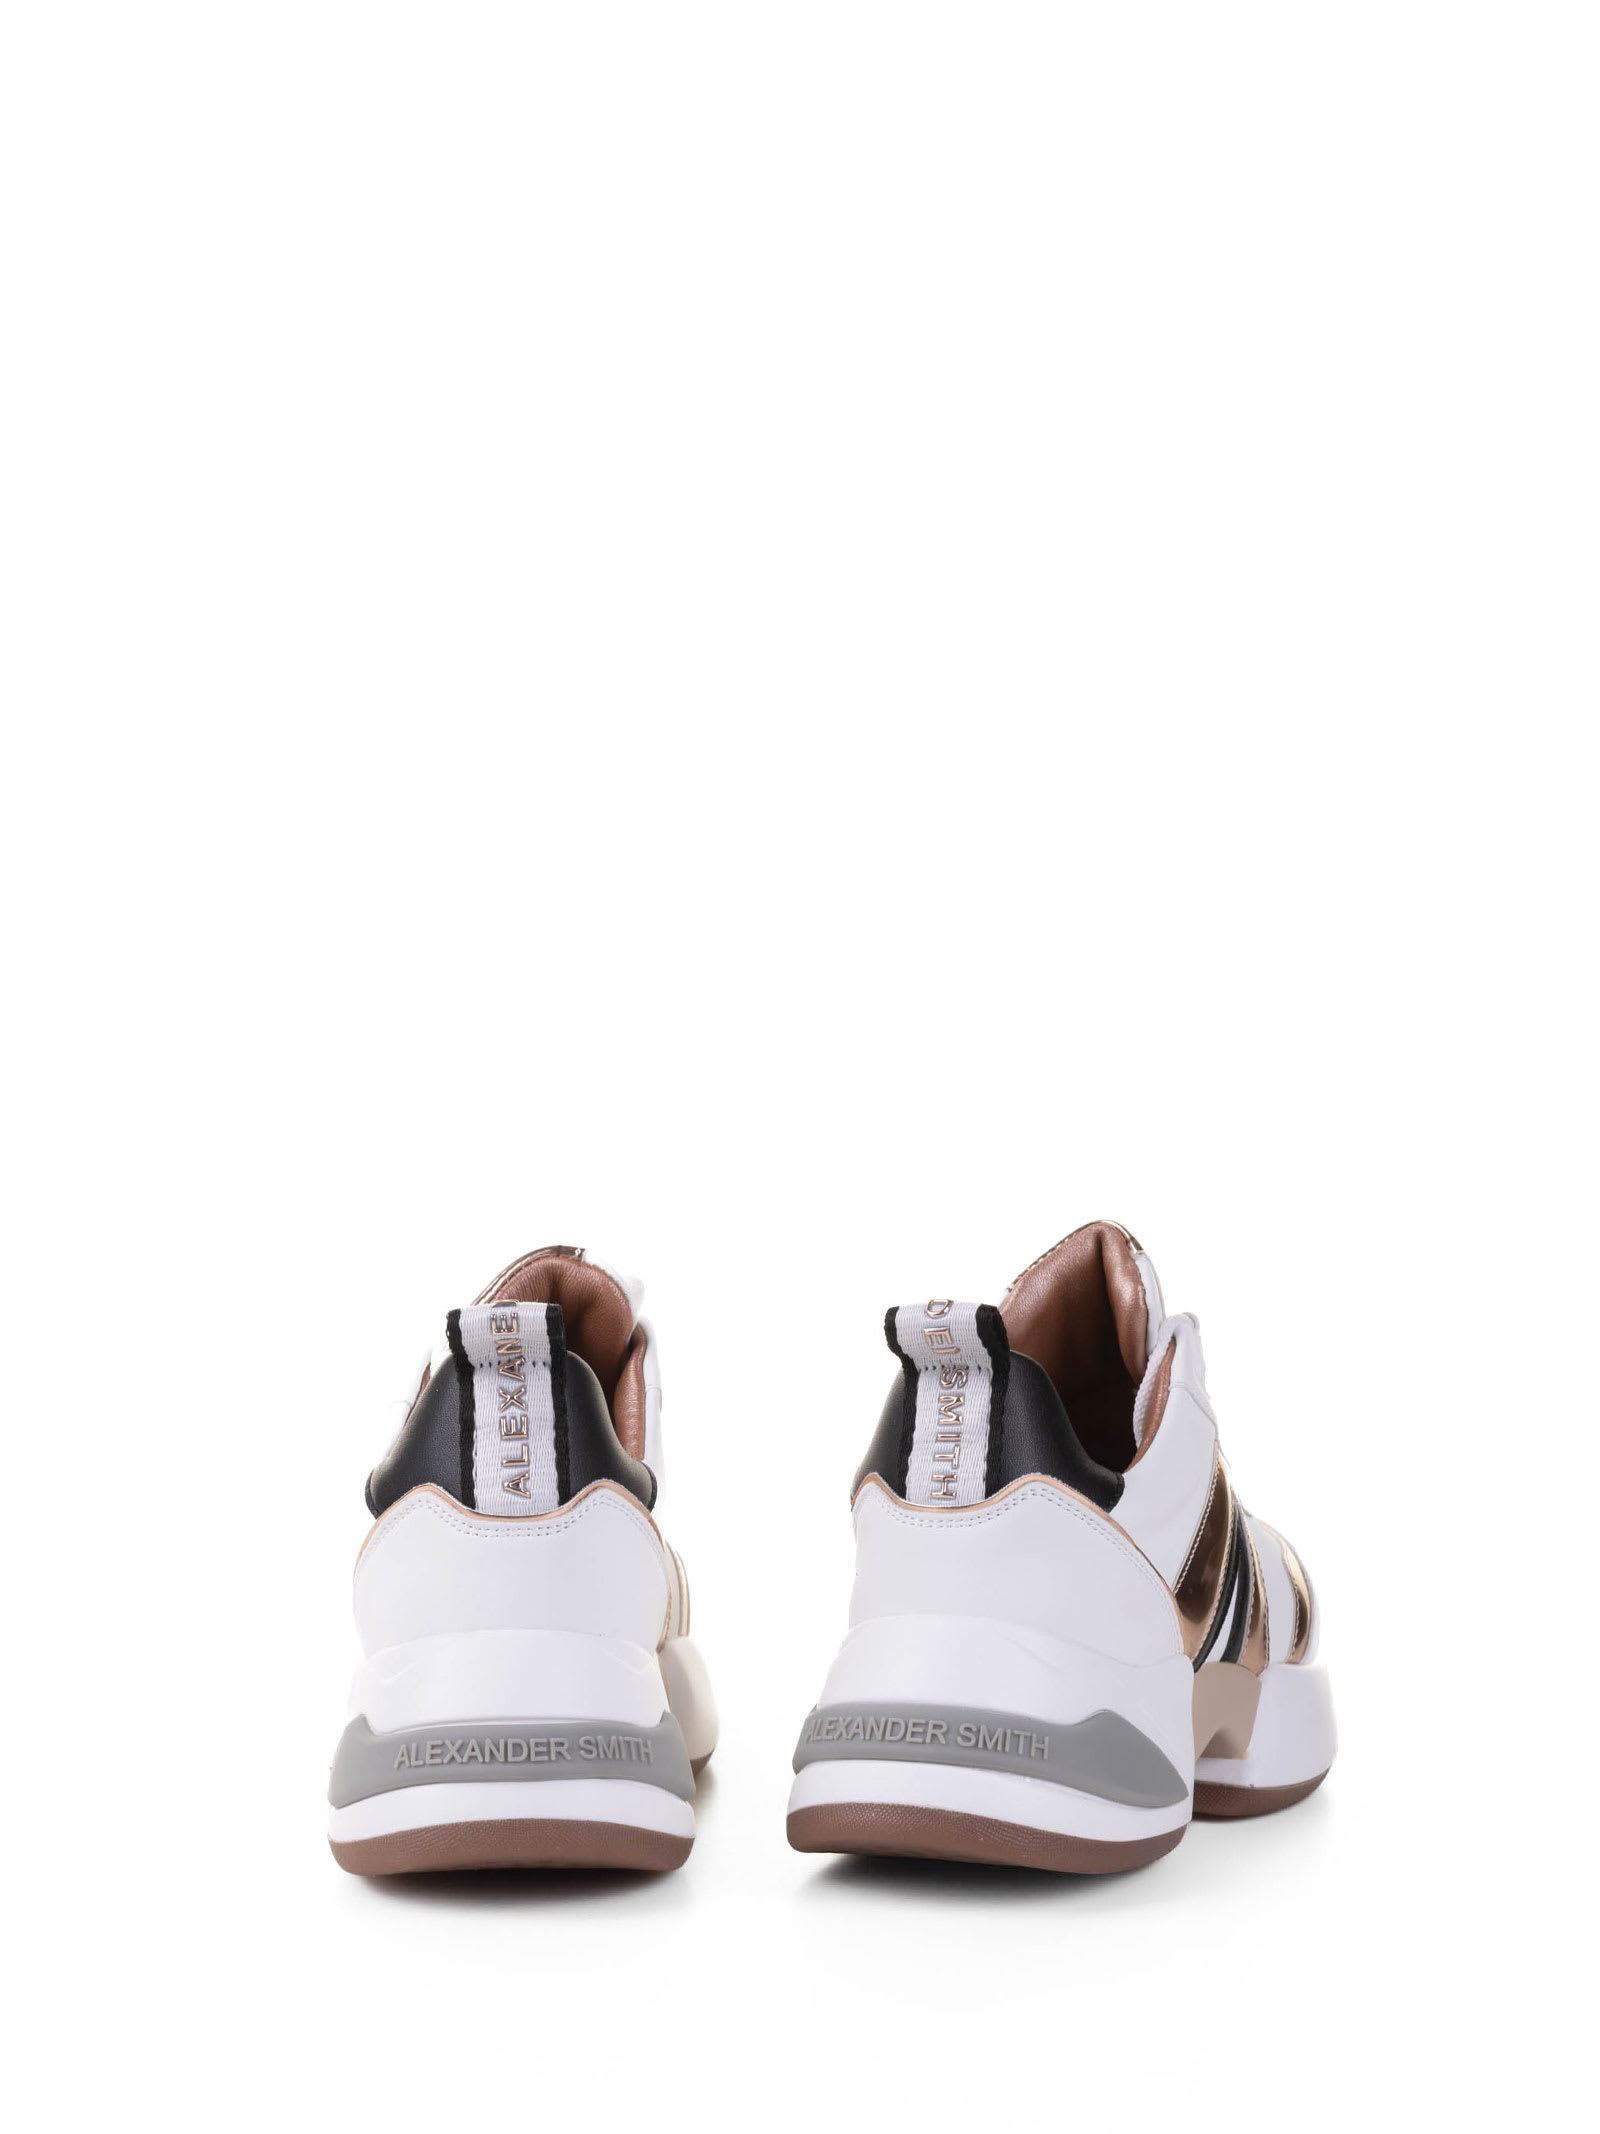 Shop Alexander Smith Marble Leather Sneaker In White Copper